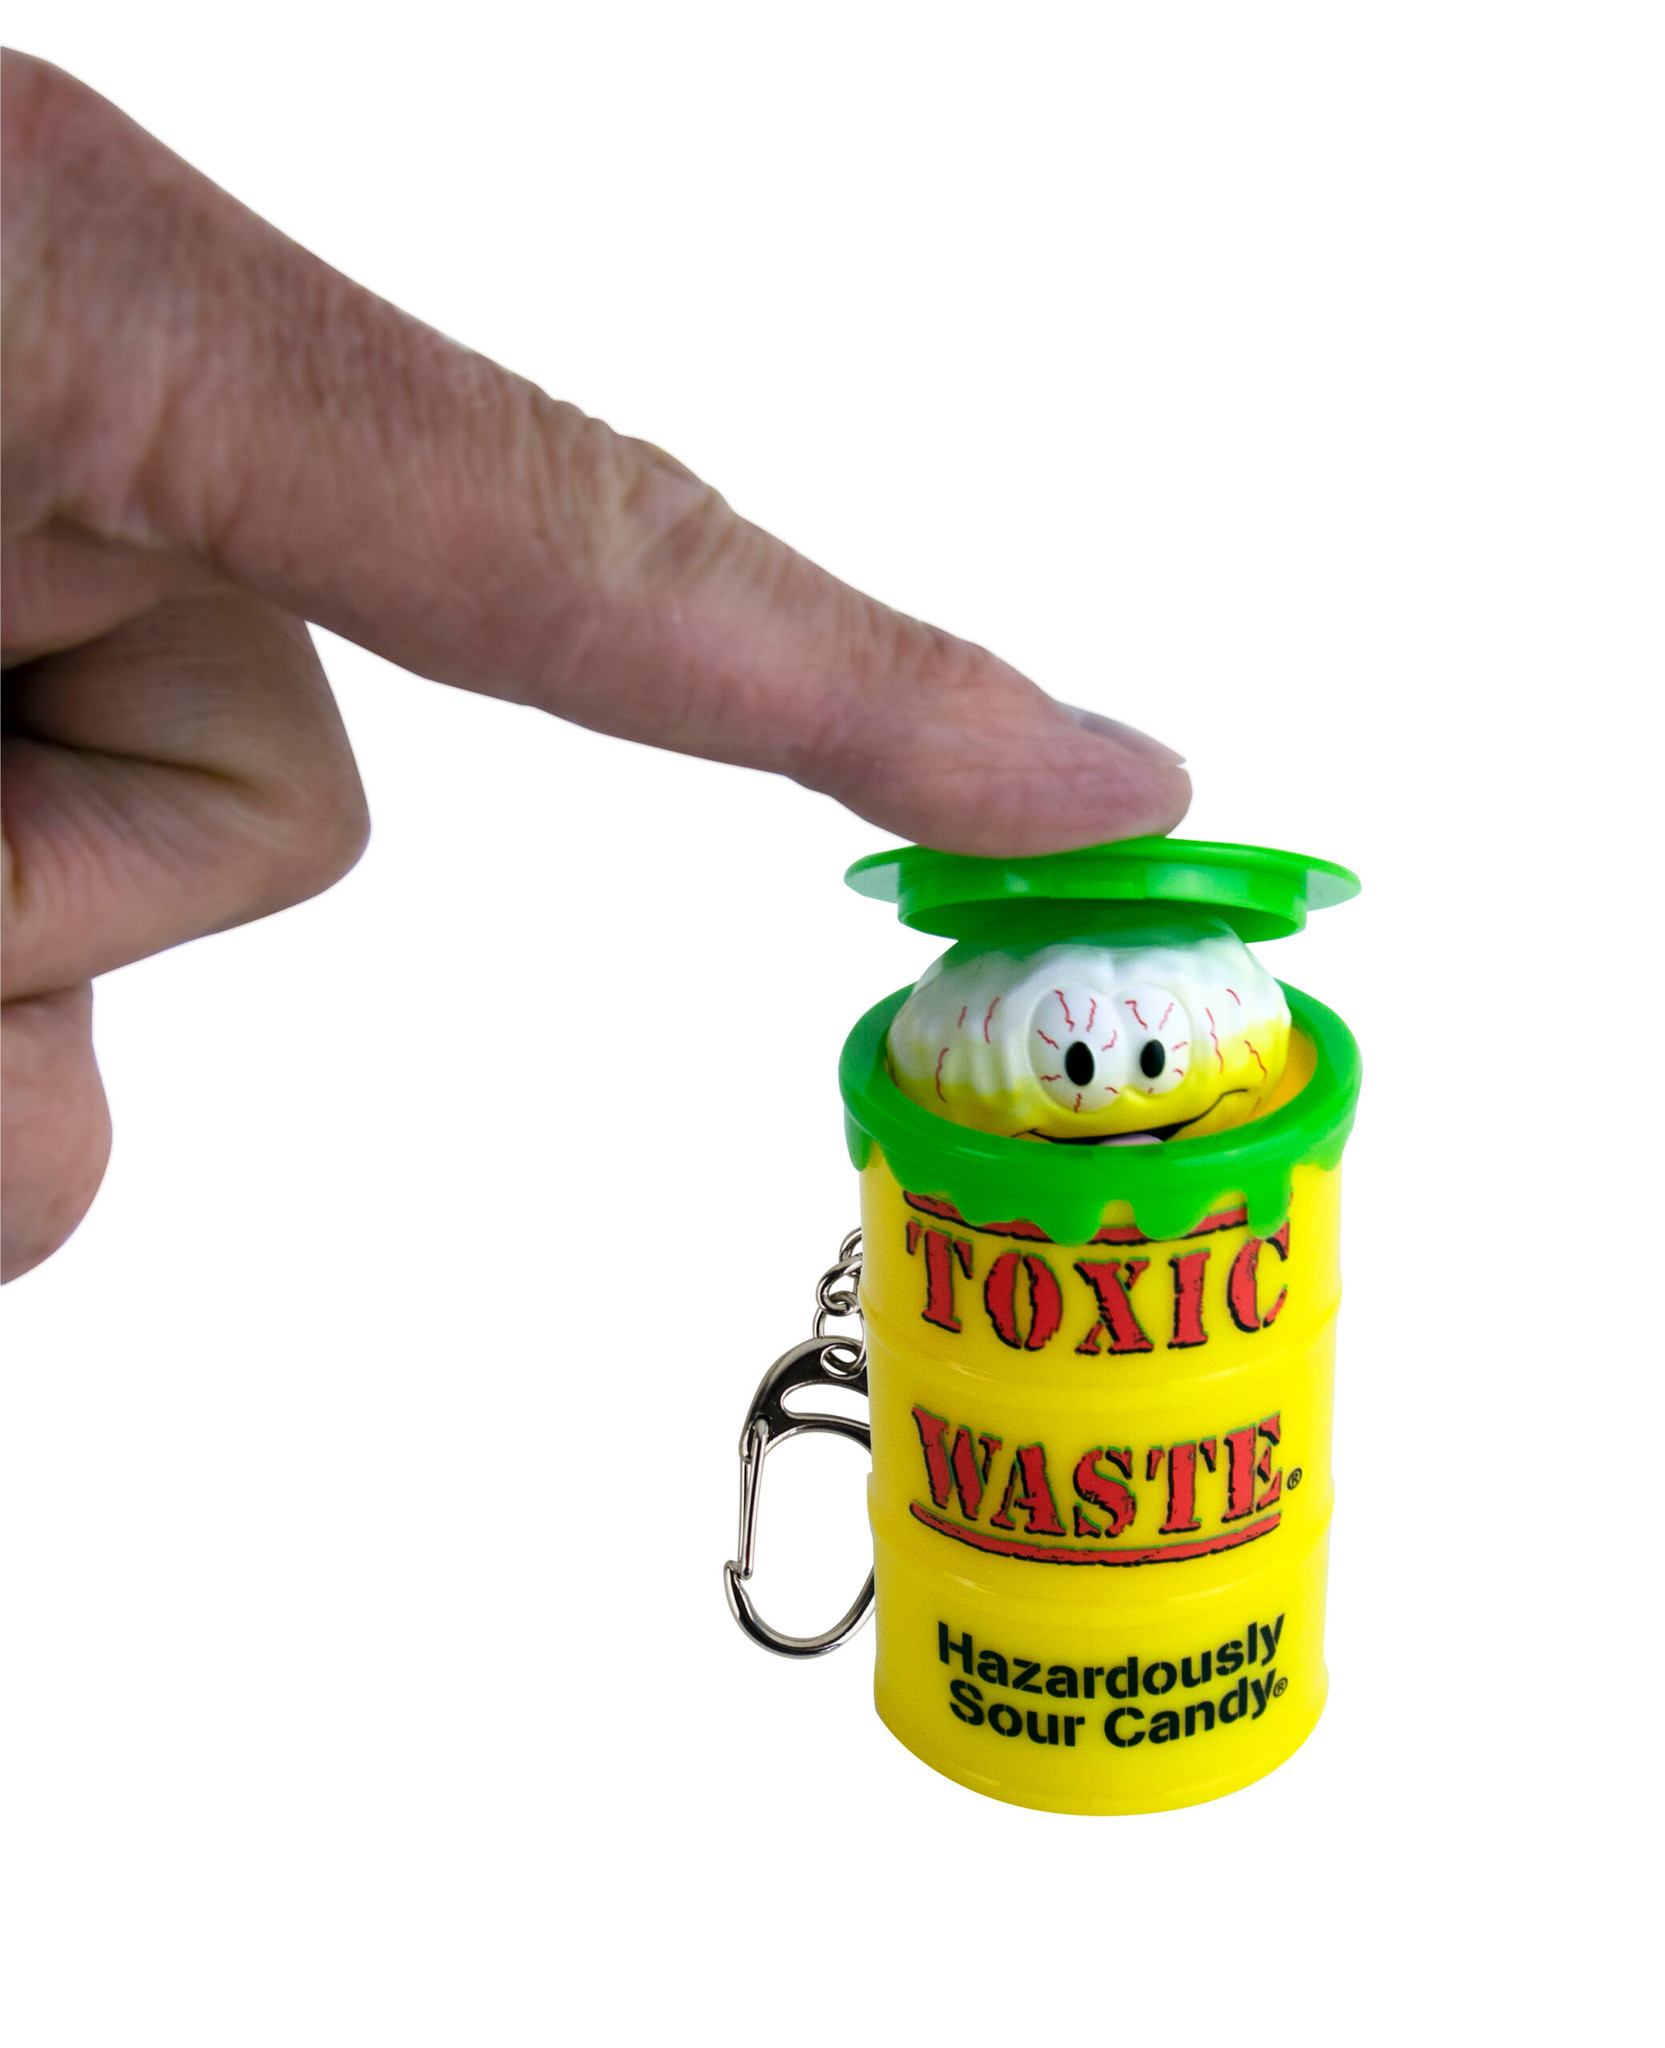 World's Smallest Toxic Waste - The Smiley Barn